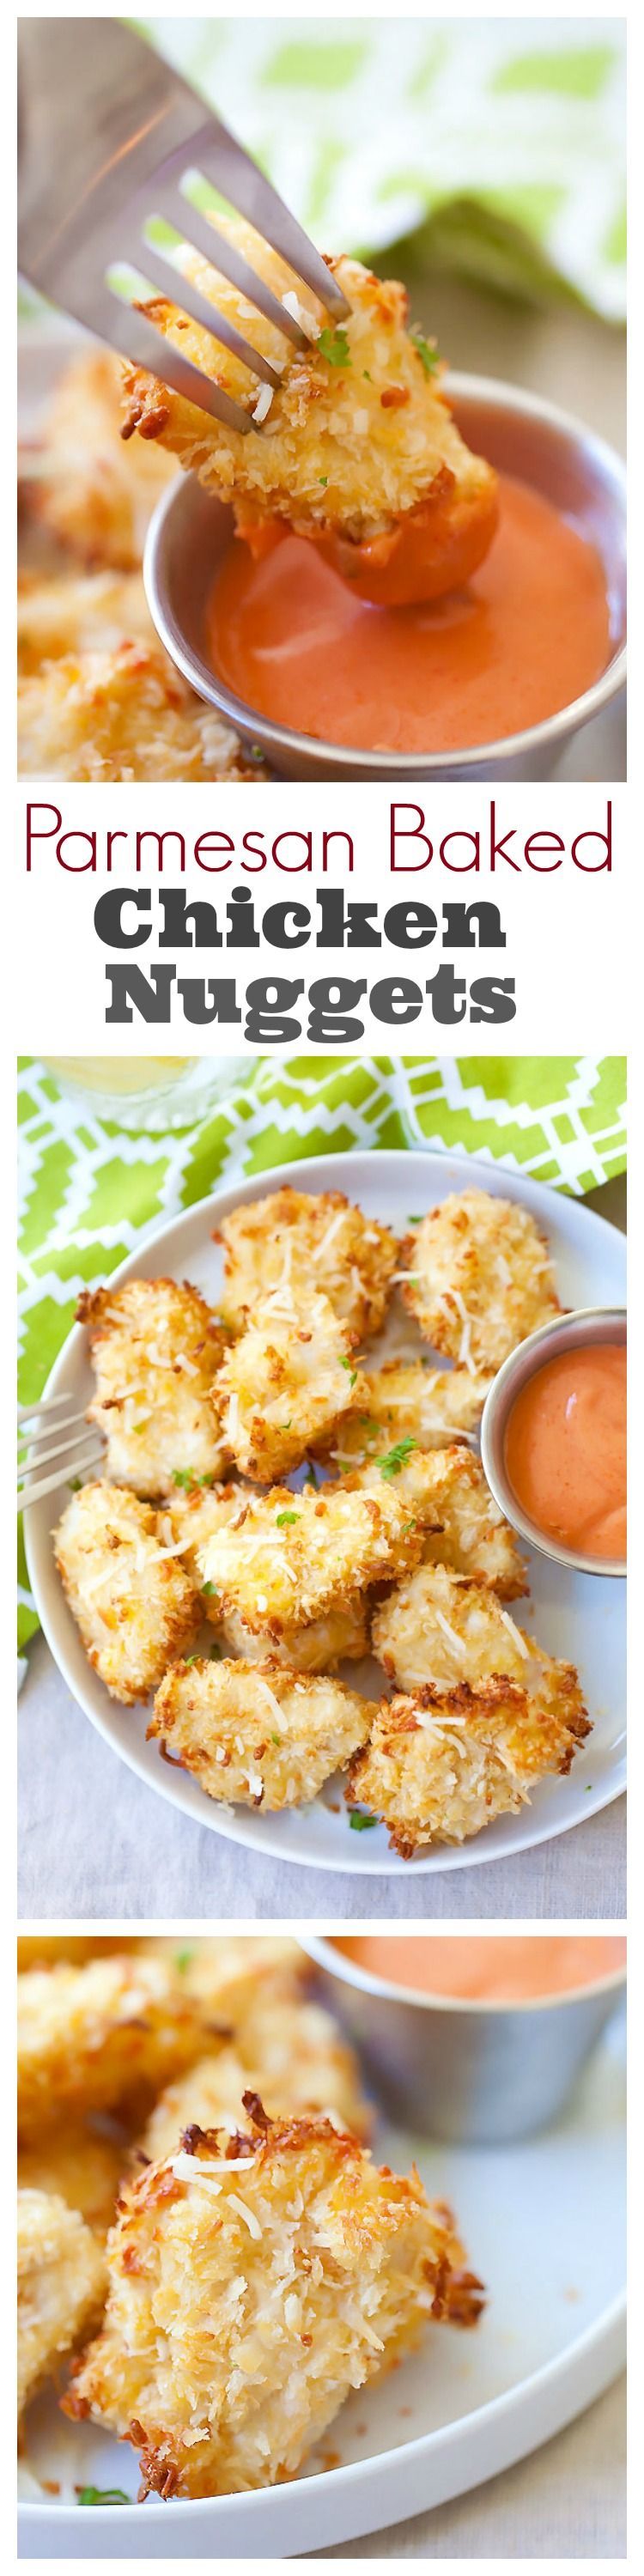 Parmesan Baked Chicken Nuggets – crispy chicken nuggets with real chicken with no frying. Easy and yummy, plus everyone loves